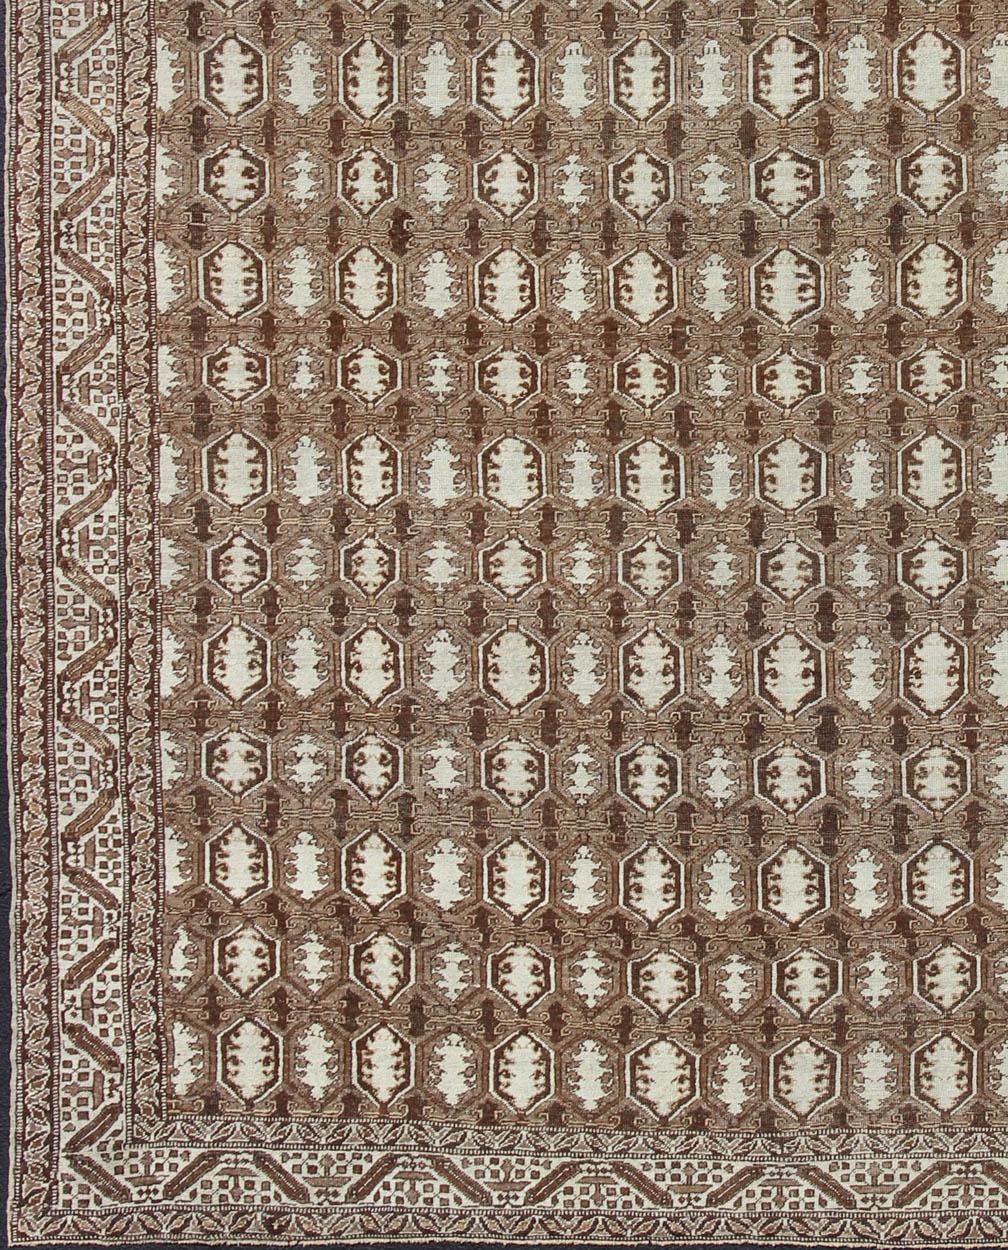 Turkish antique carpet from Turkey with sub-geometric pattern in shades of brown. Keivan Woven Arts / rug / EN-176556, country of origin / type: Turkey / Oushak, circa 1910
Measures: 10'6 x 14'8.
Antique Turkish rug with organic motifs in brown and